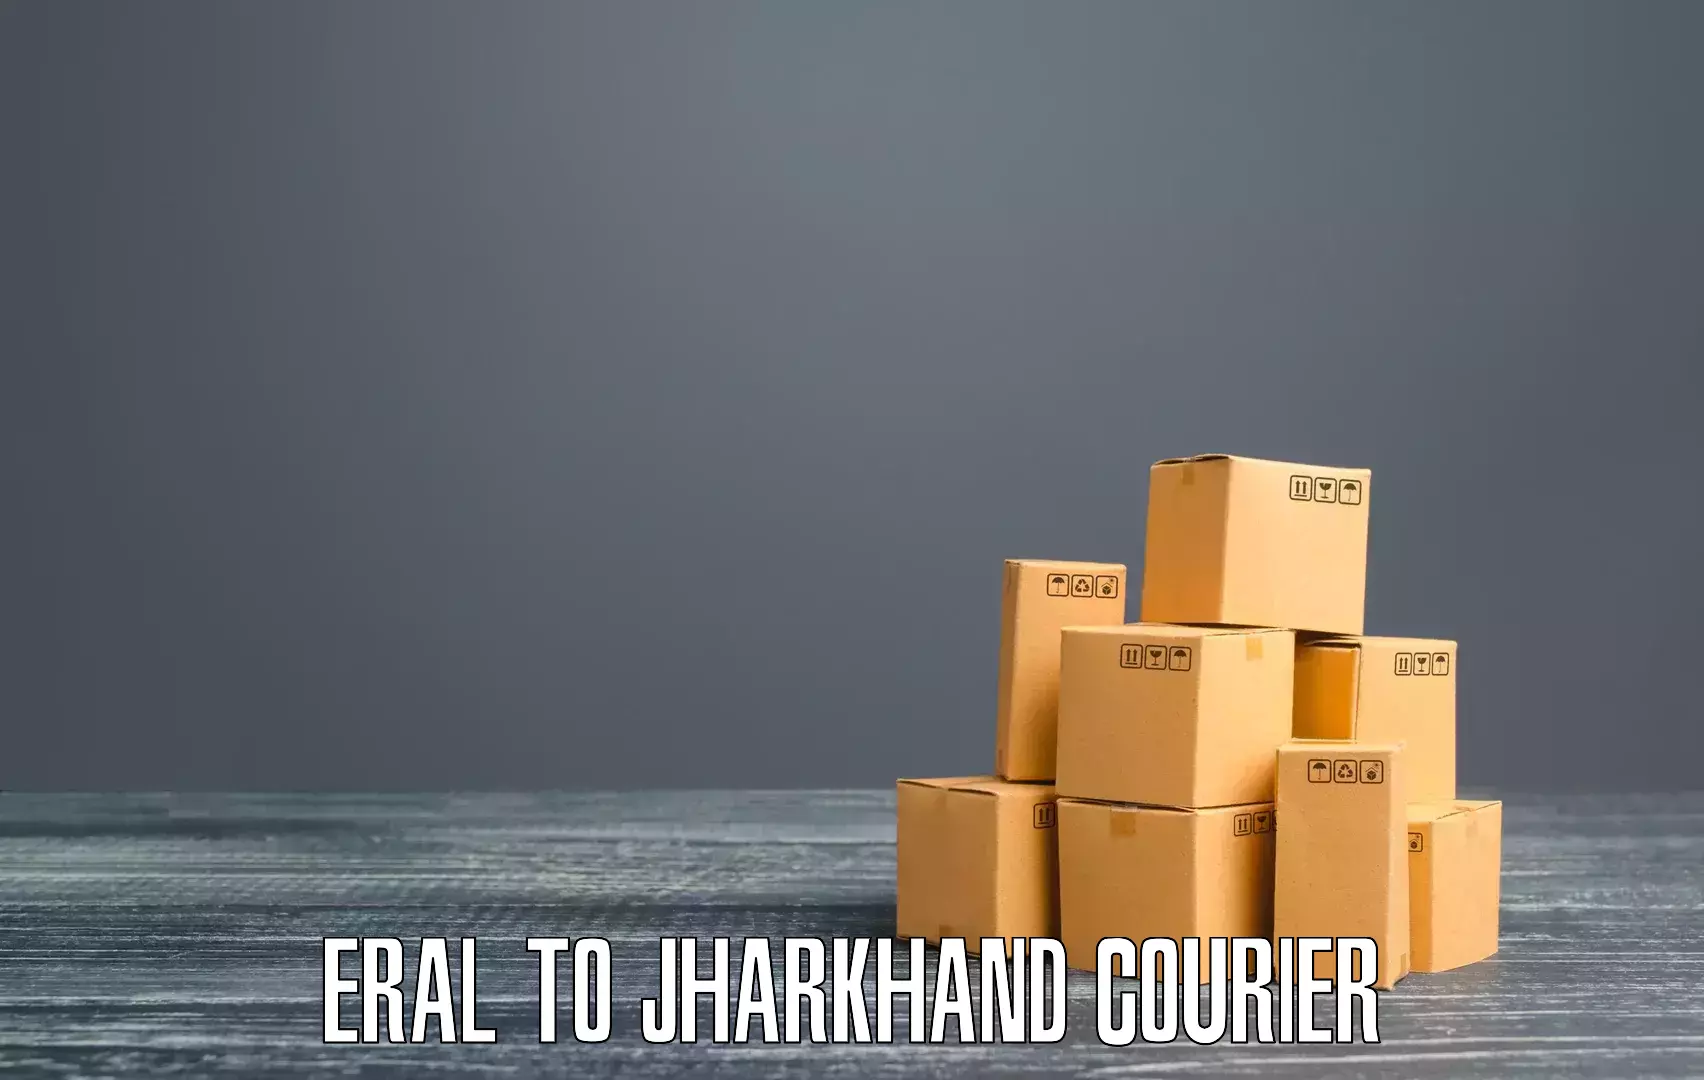 Efficient courier operations Eral to Isri